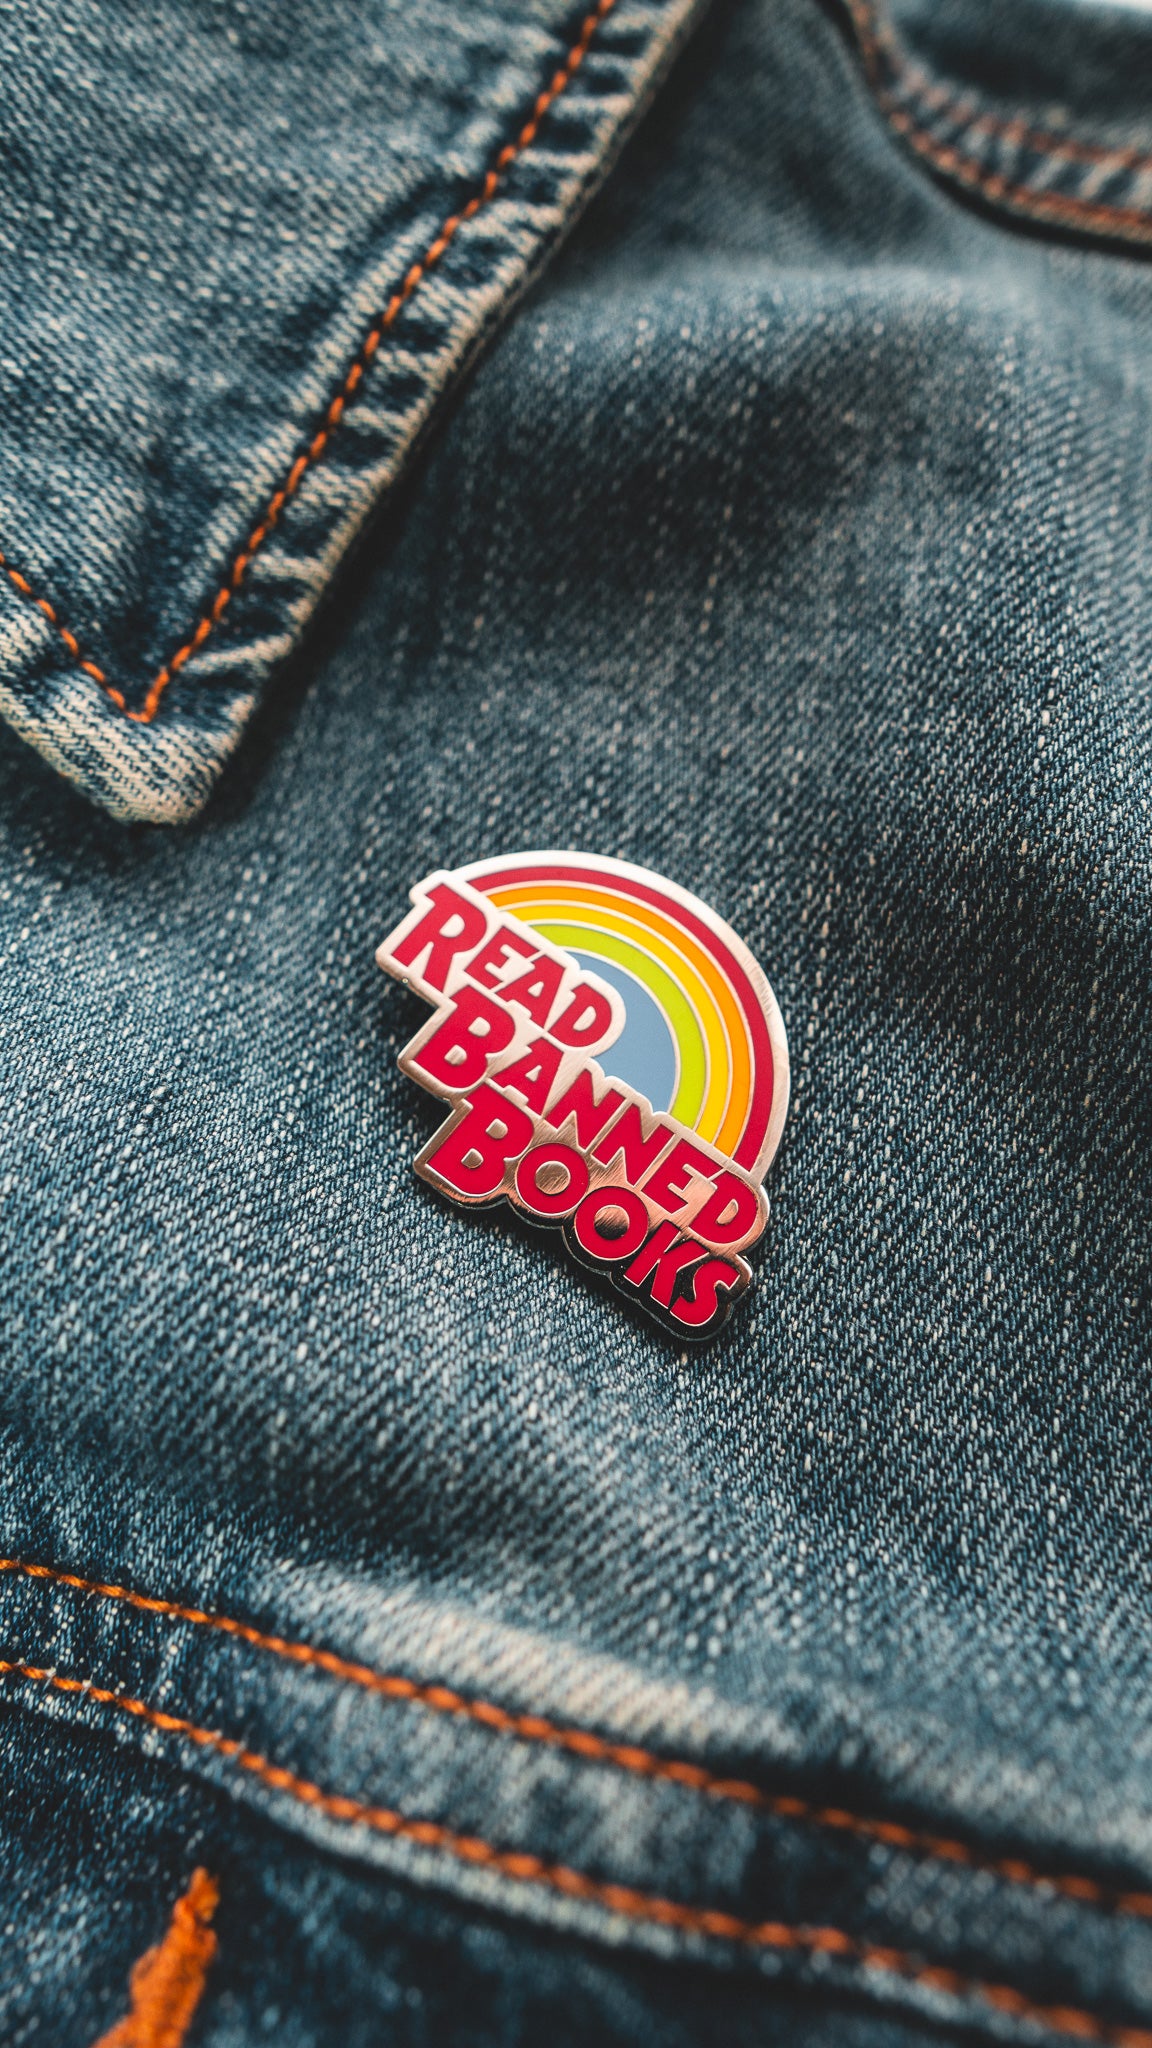 READ BANNED BOOKS PIN